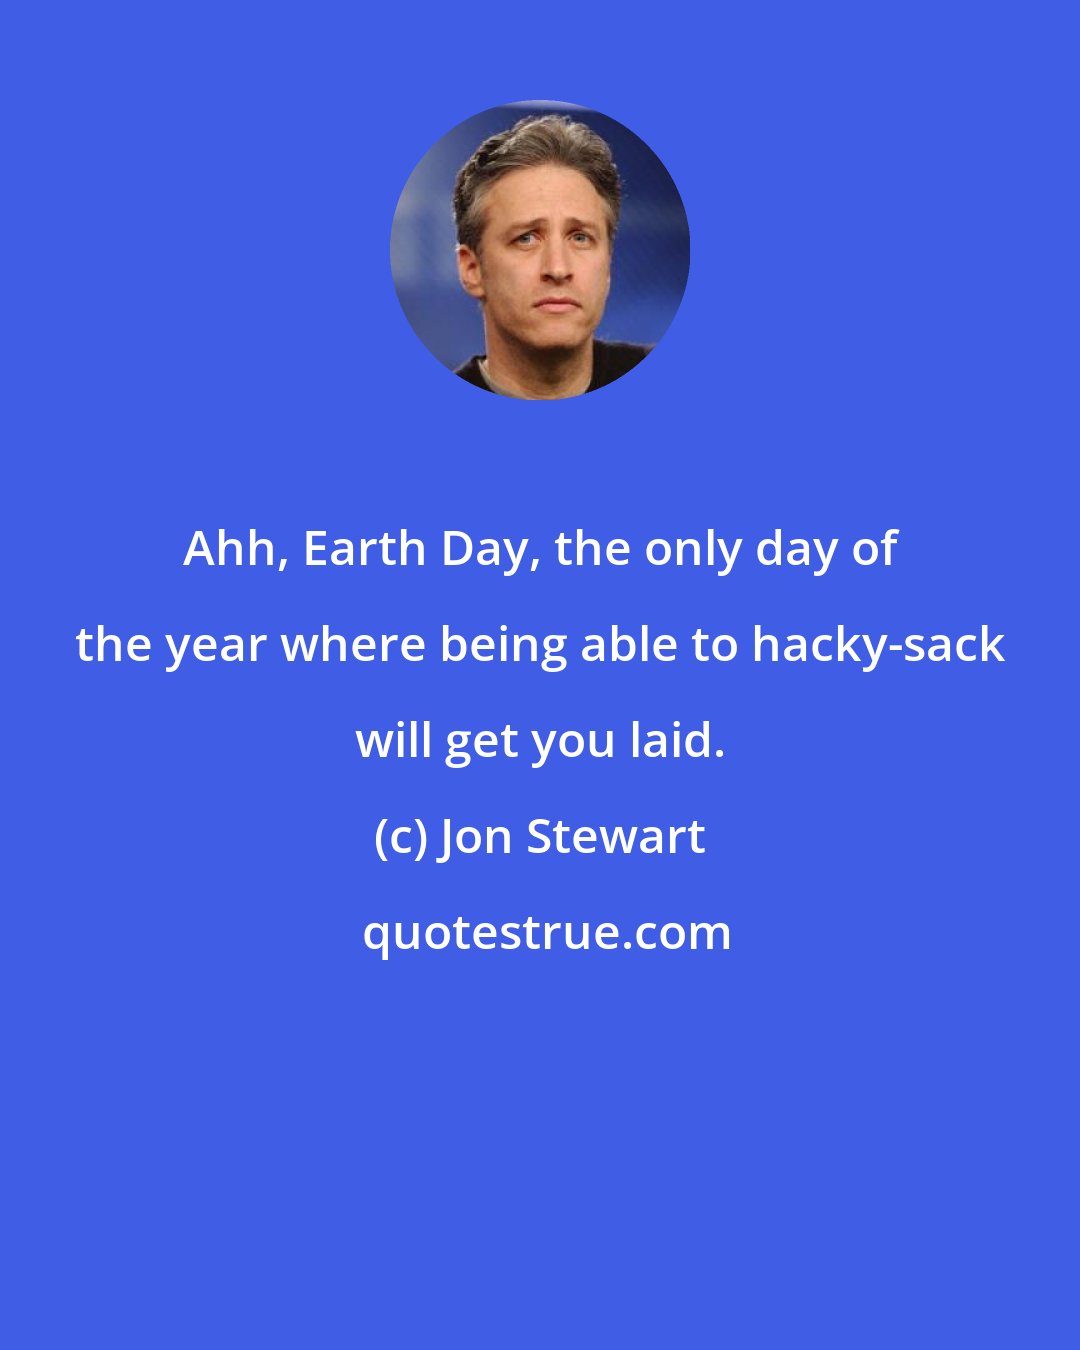 Jon Stewart: Ahh, Earth Day, the only day of the year where being able to hacky-sack will get you laid.